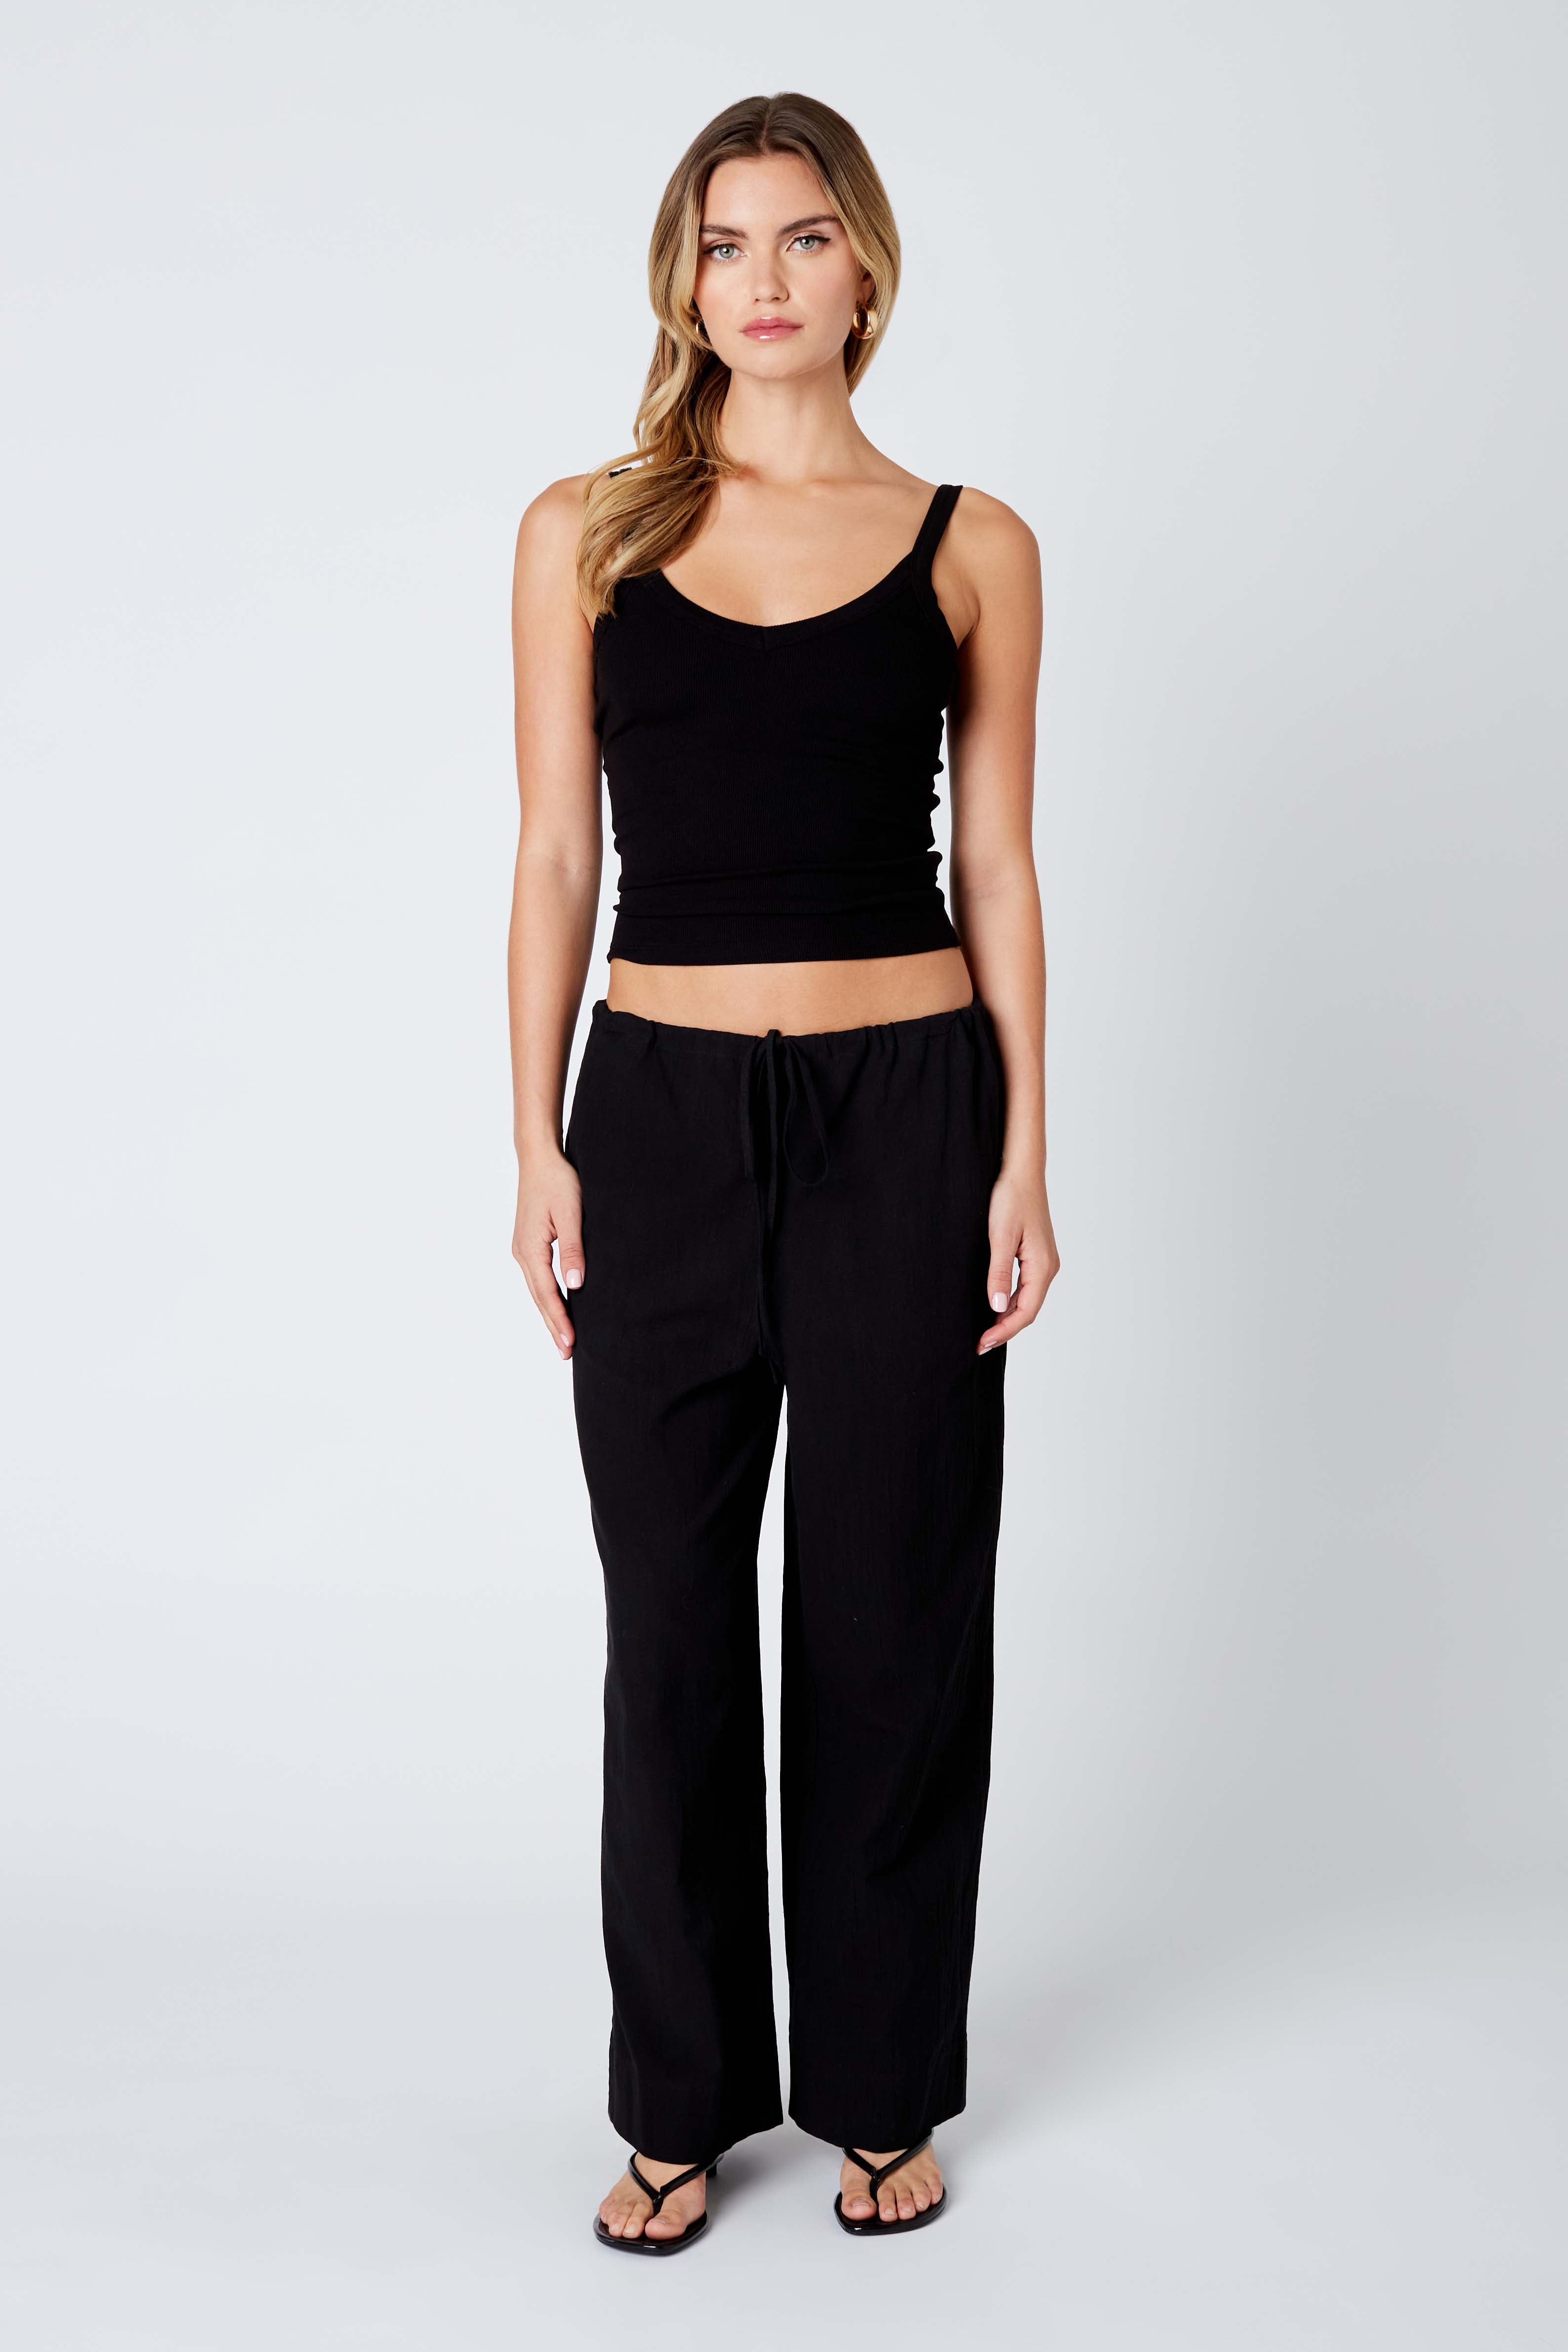 Linen Drawstring Pant in Black Front View